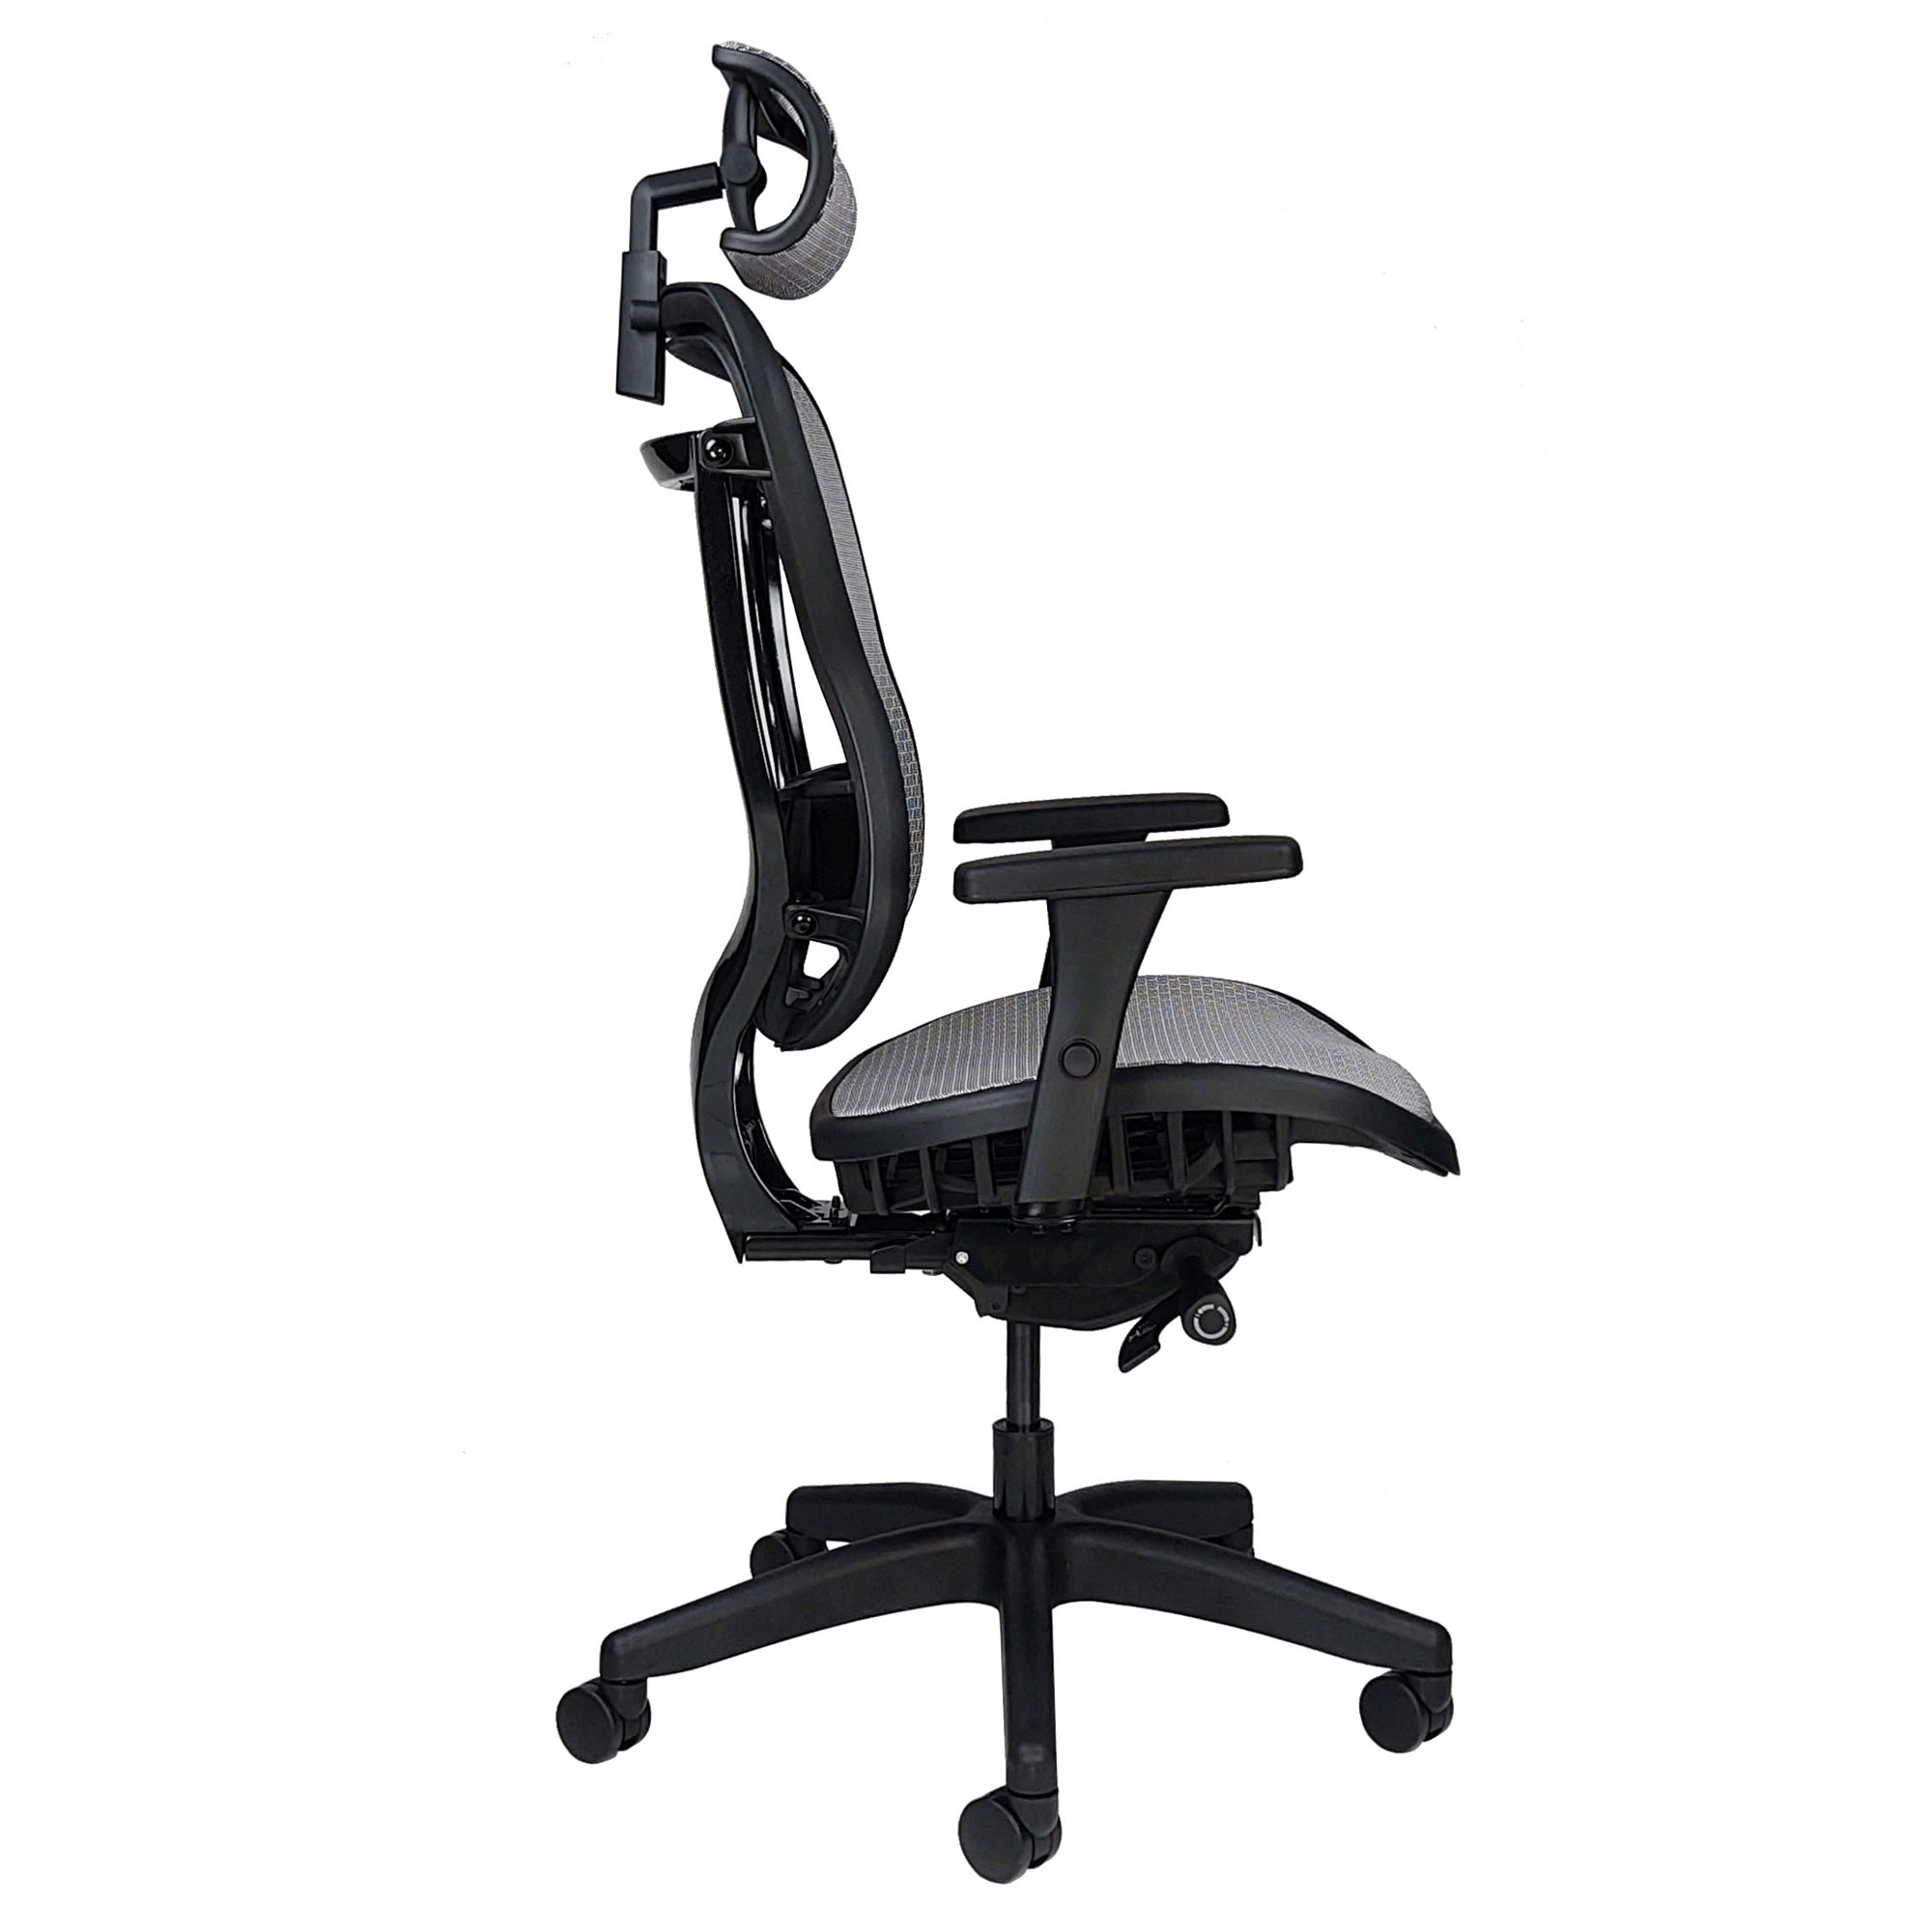 All-mesh ergonomic office chair with headrest, arms and wheels - side view